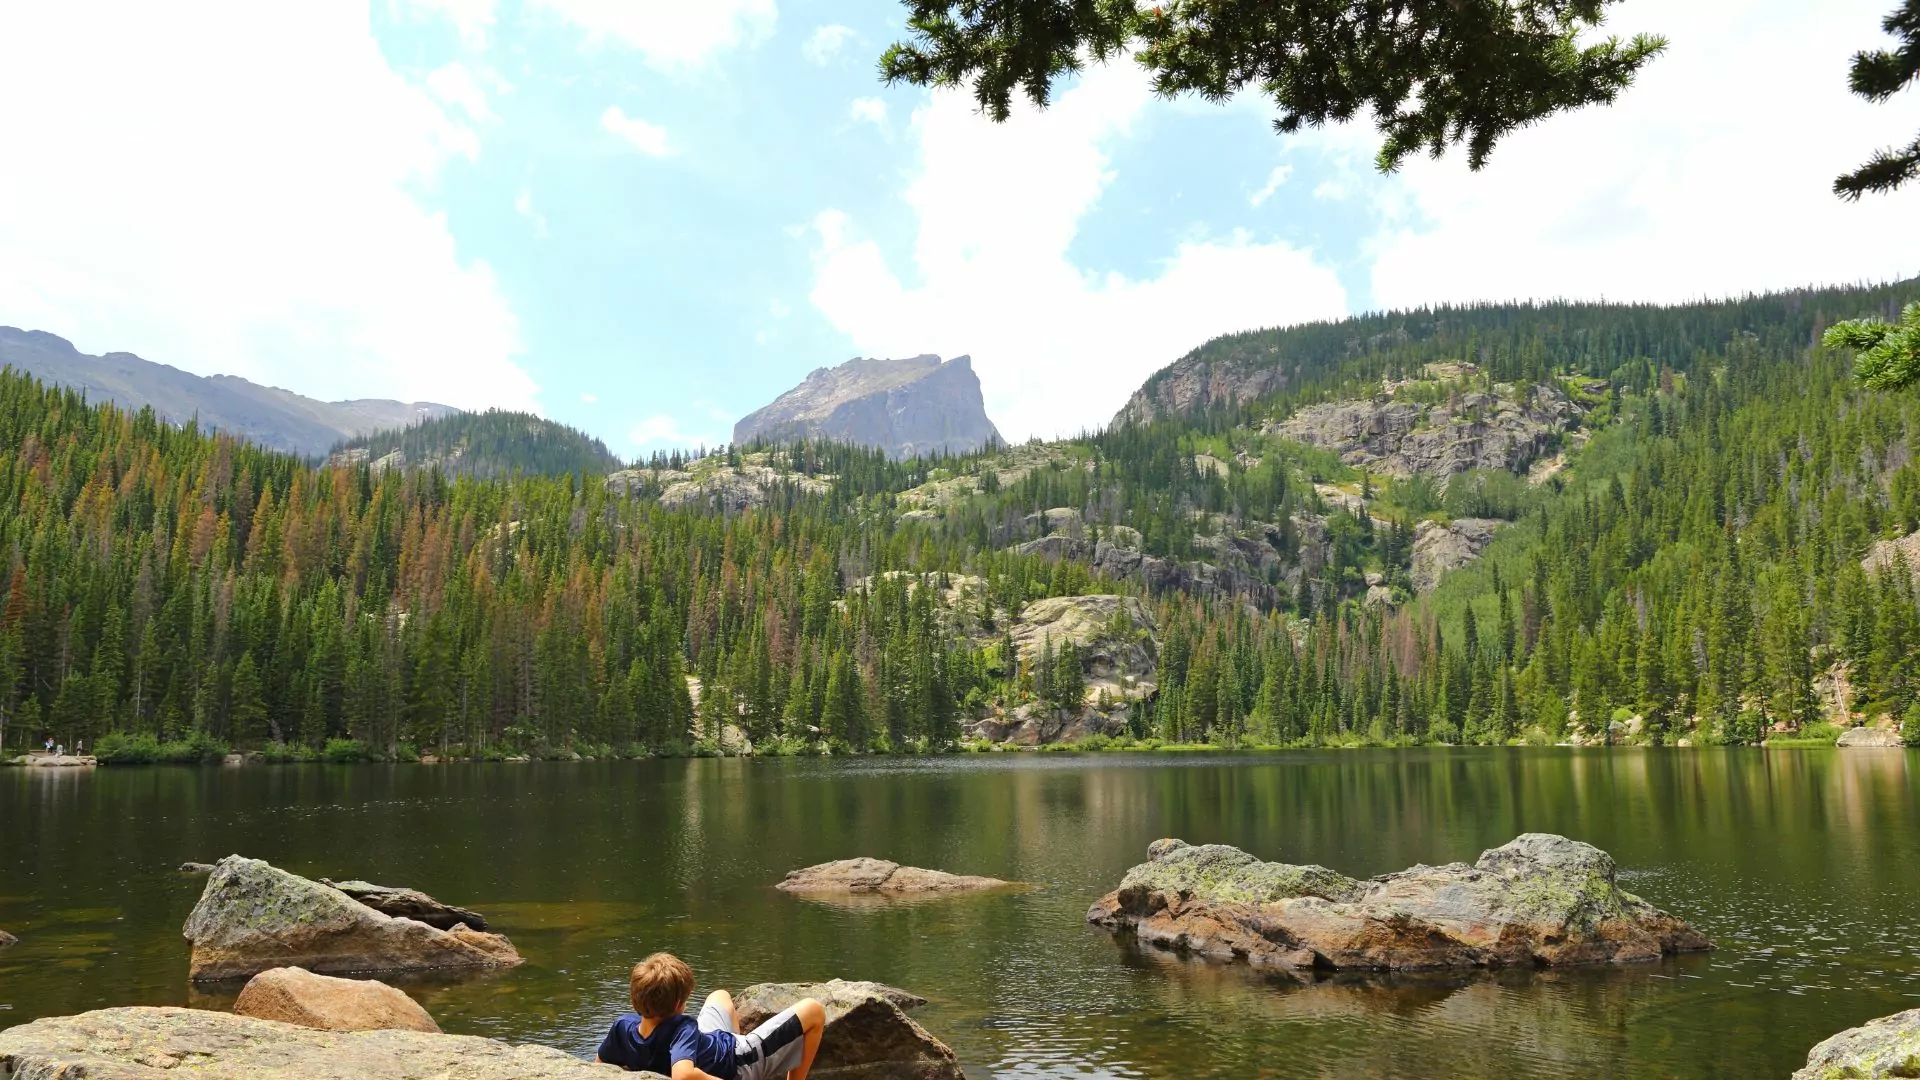 Someone reclines on a rock at the edge of a clear, still lake in the mountains